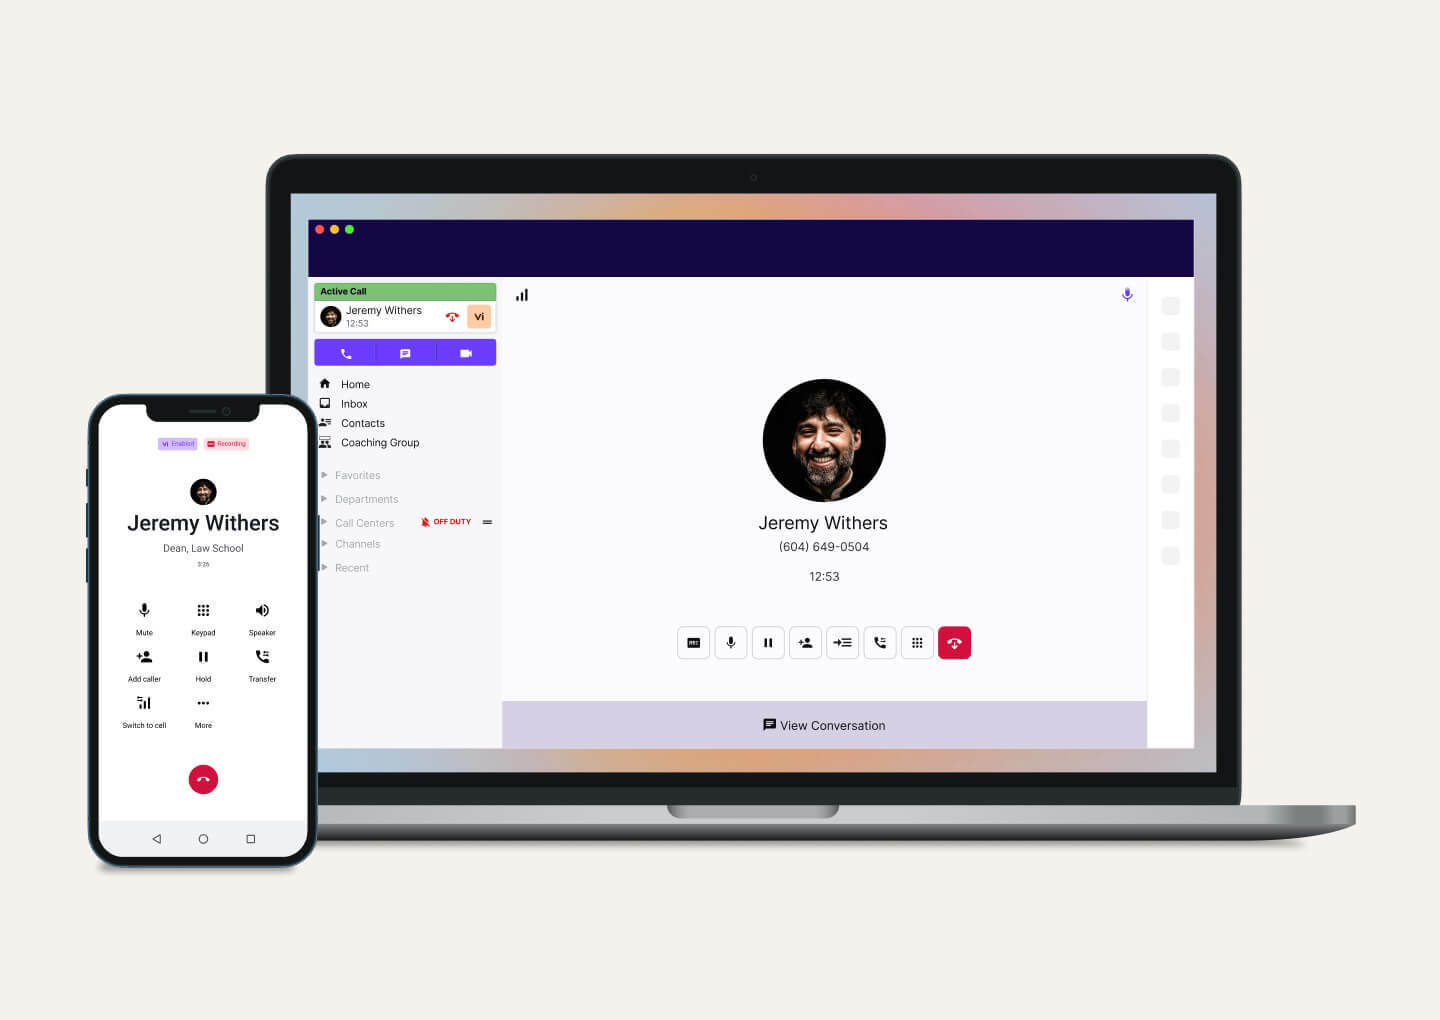 conference calls from dialpad's desktop and mobile app